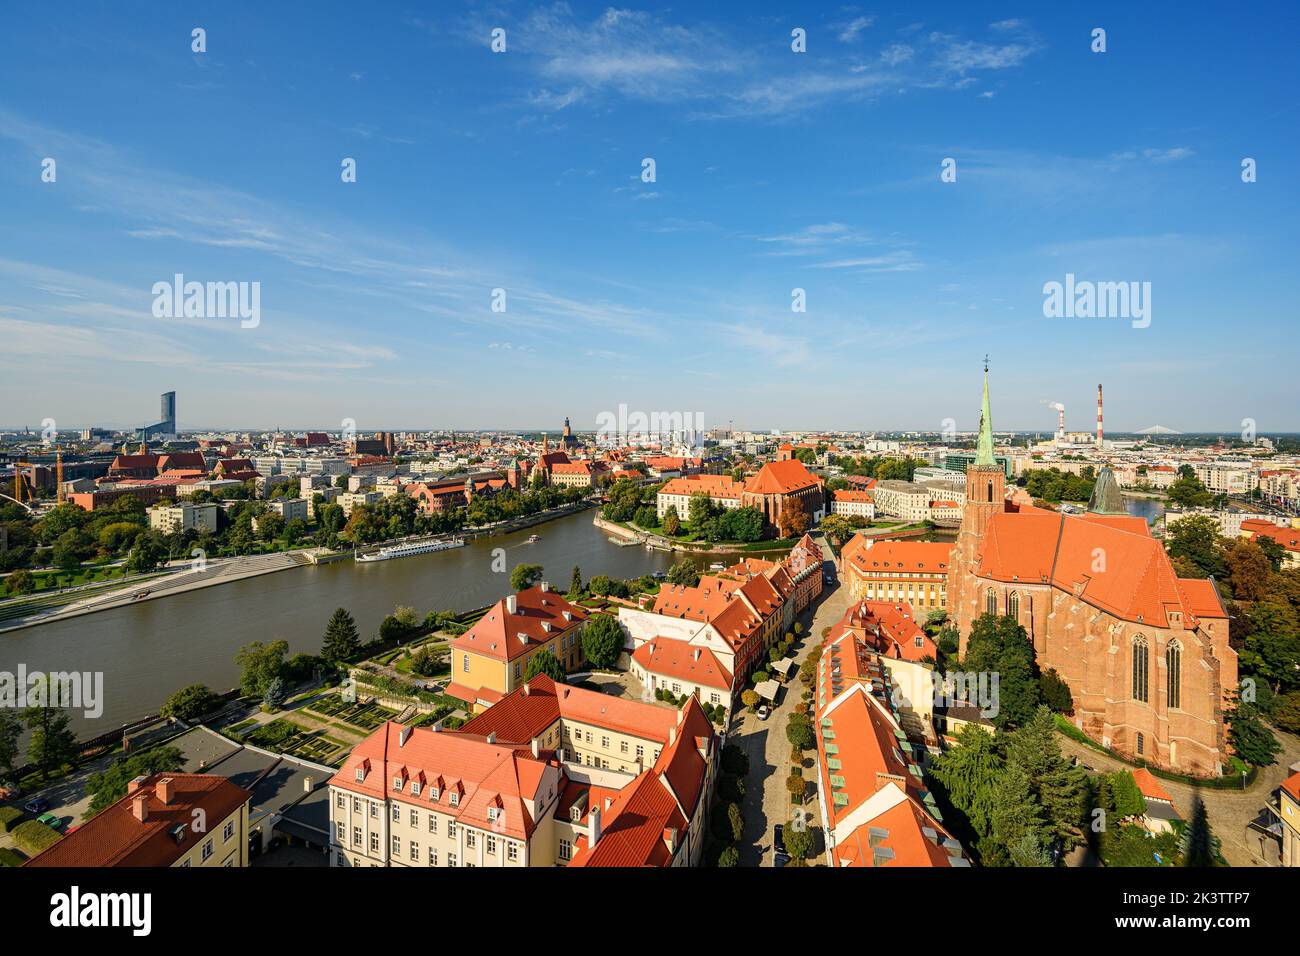 Wroclaw, Poland - September 07, 2022: view of the city from the church tower Stock Photo